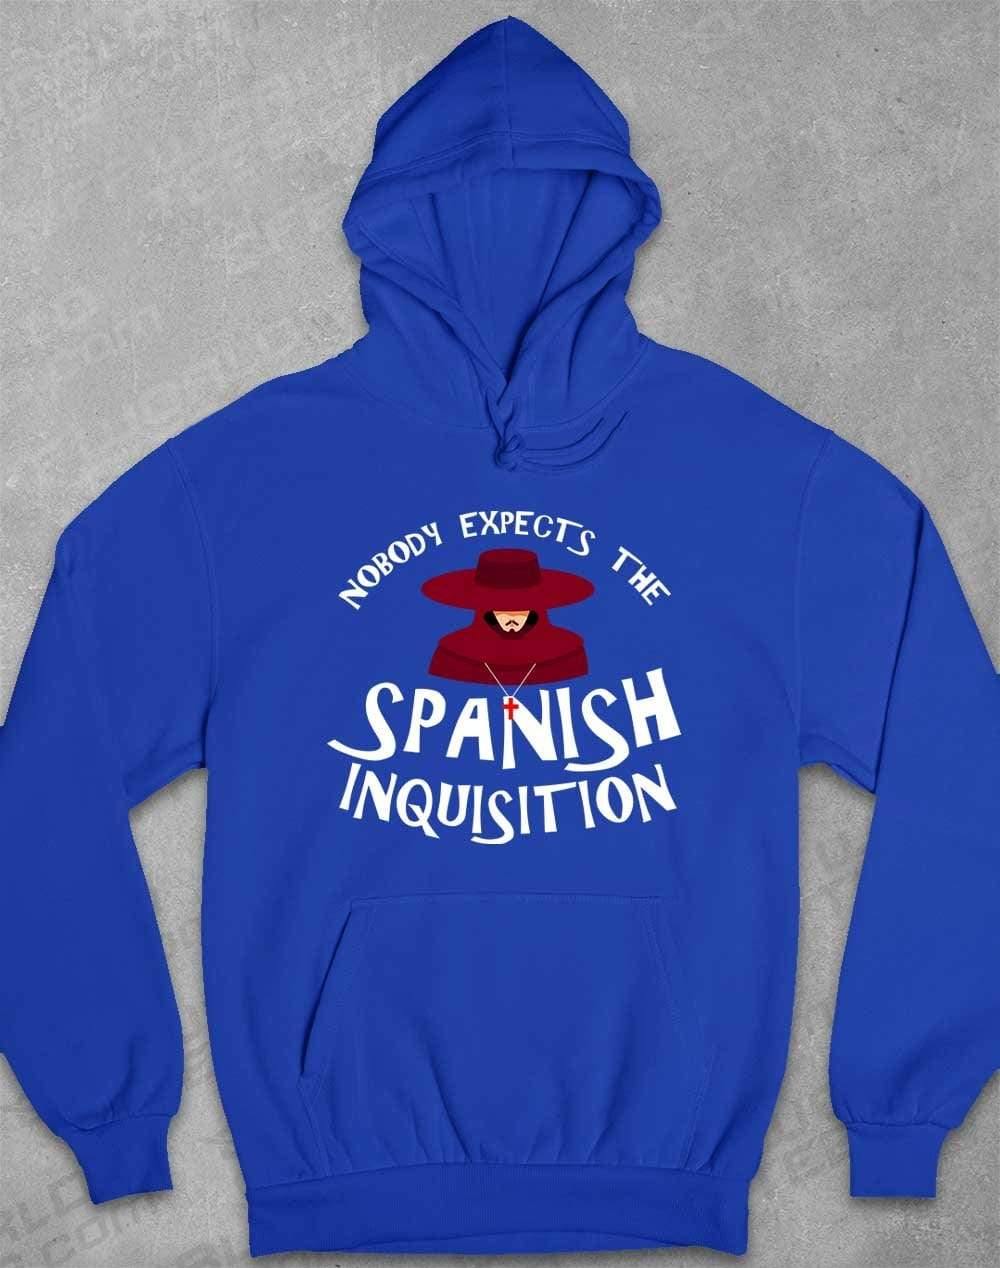 Nobody Expects the Spanish Inquisition Hoodie XS / Royal Blue  - Off World Tees